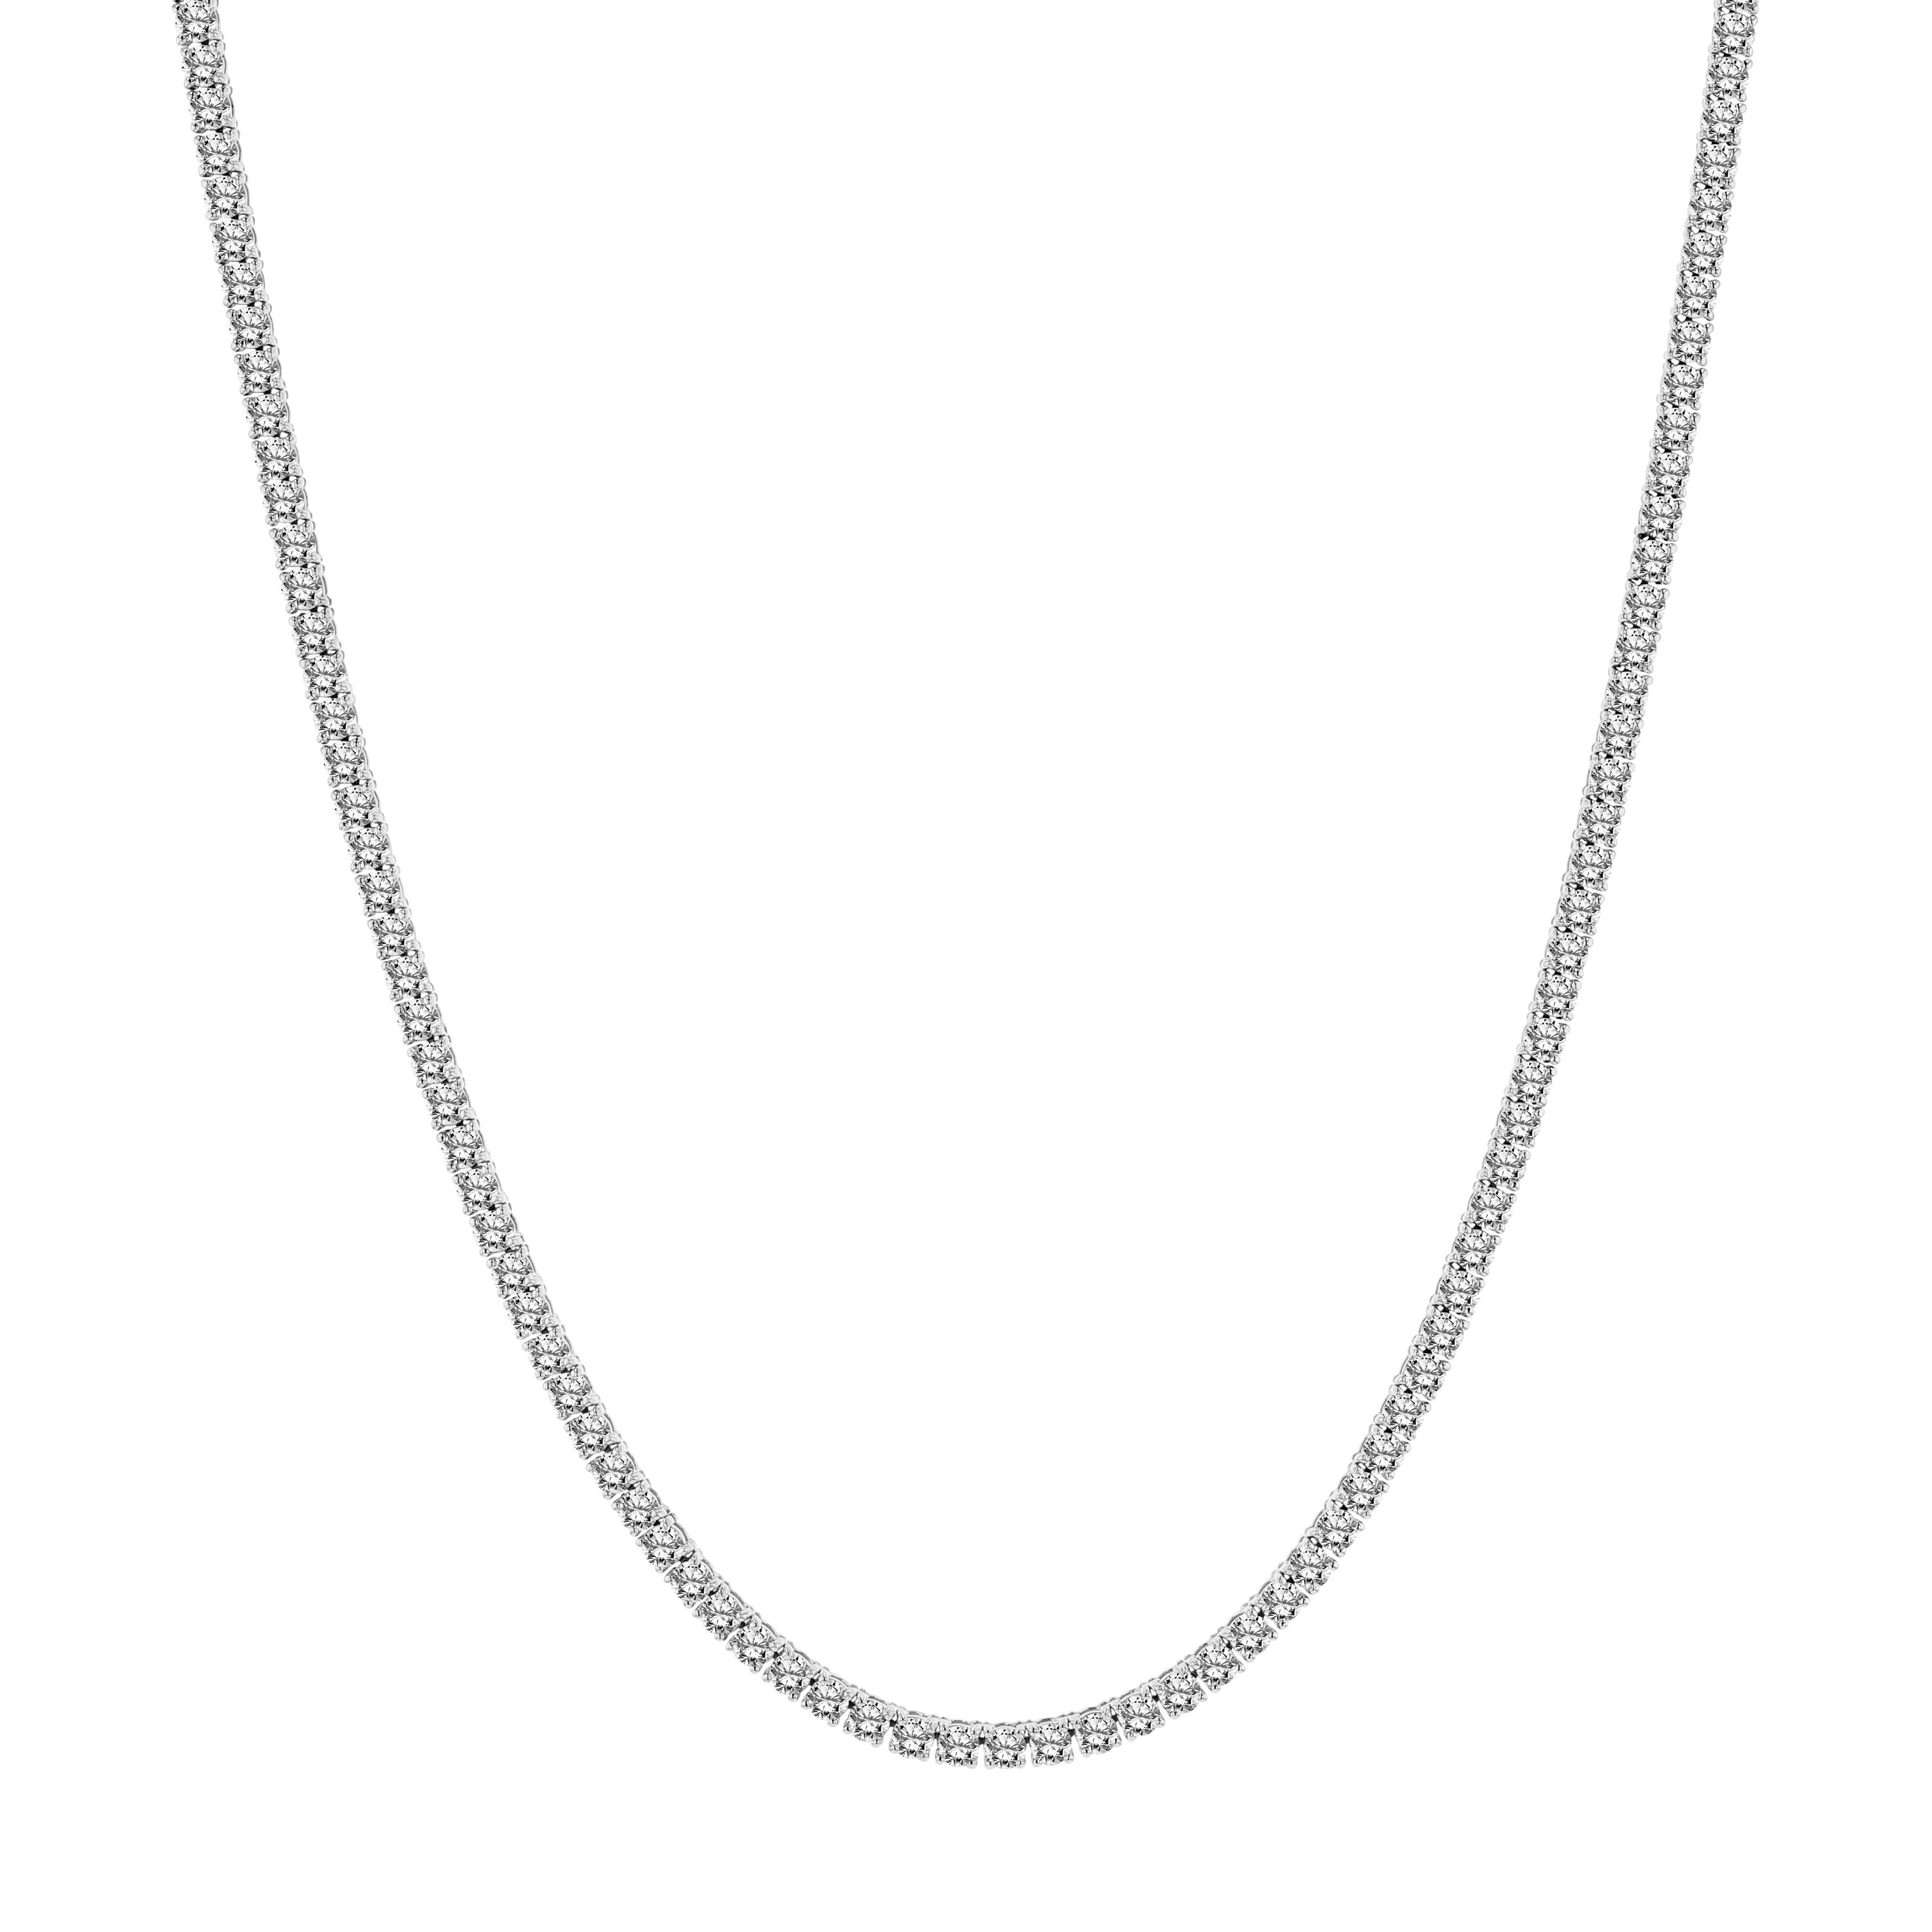 View 3.00ctw Diamond Straight Tennis Necklace in  14k Gold